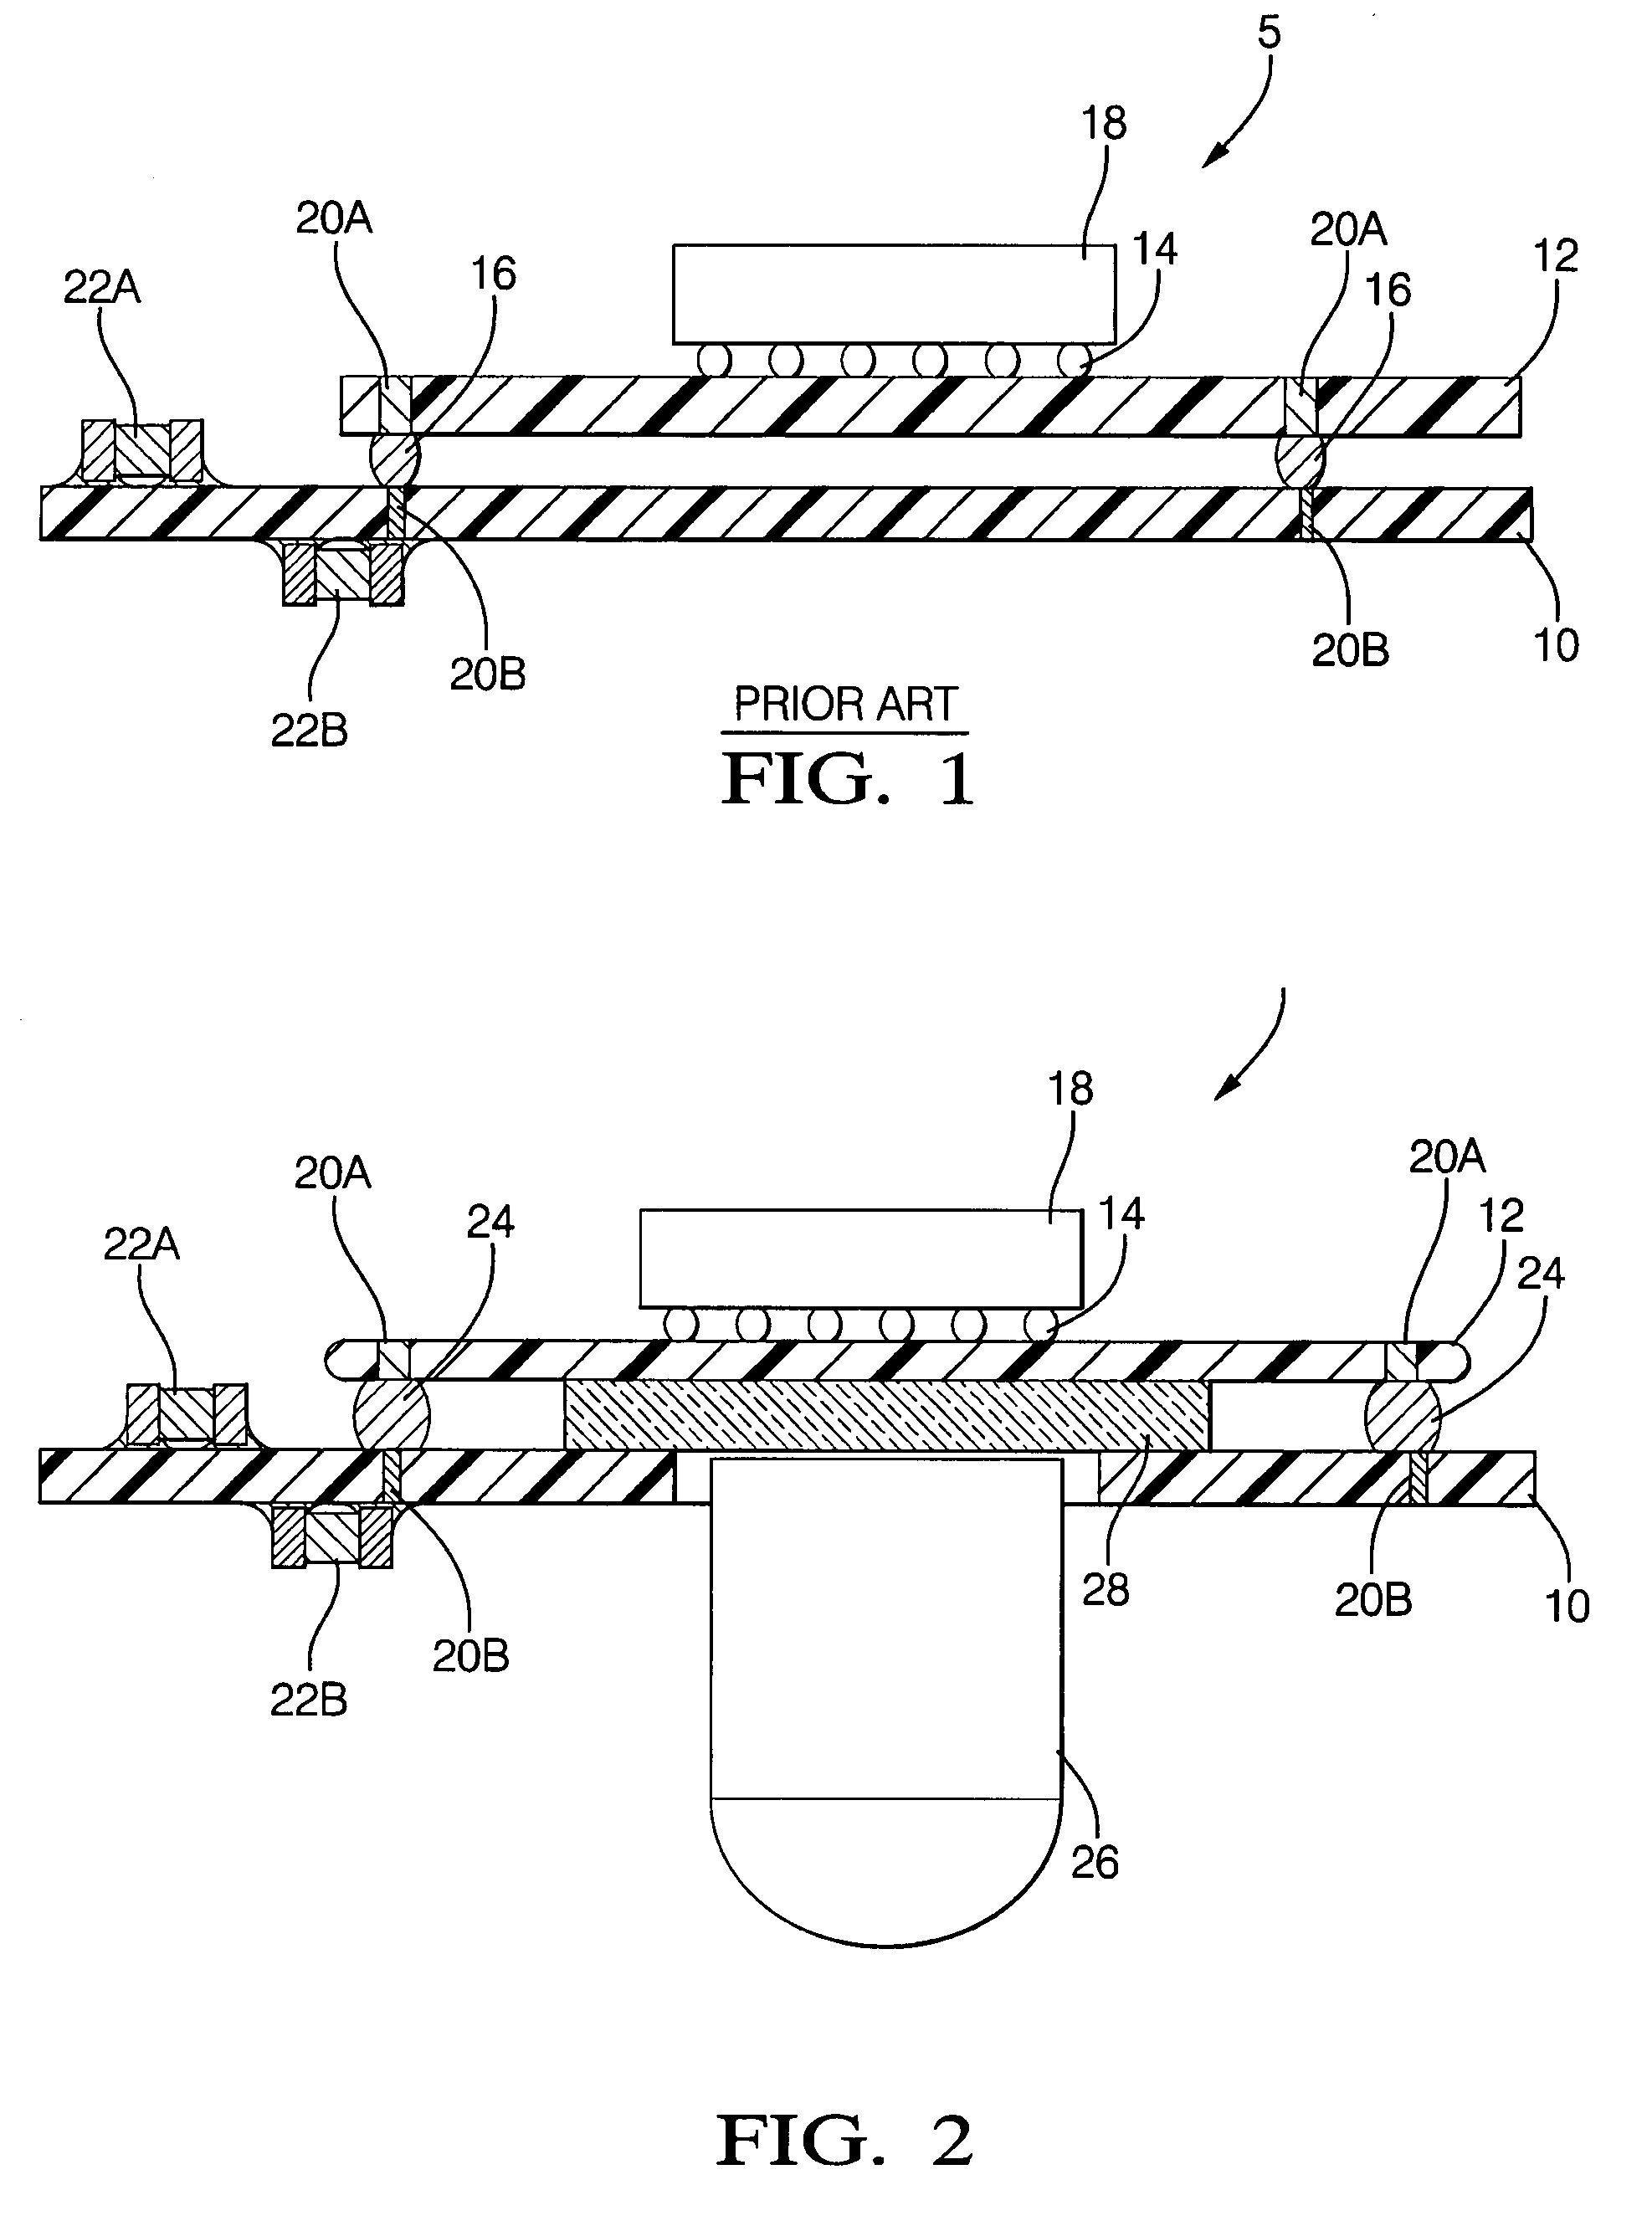 Interconnect for an electrical circuit substrate